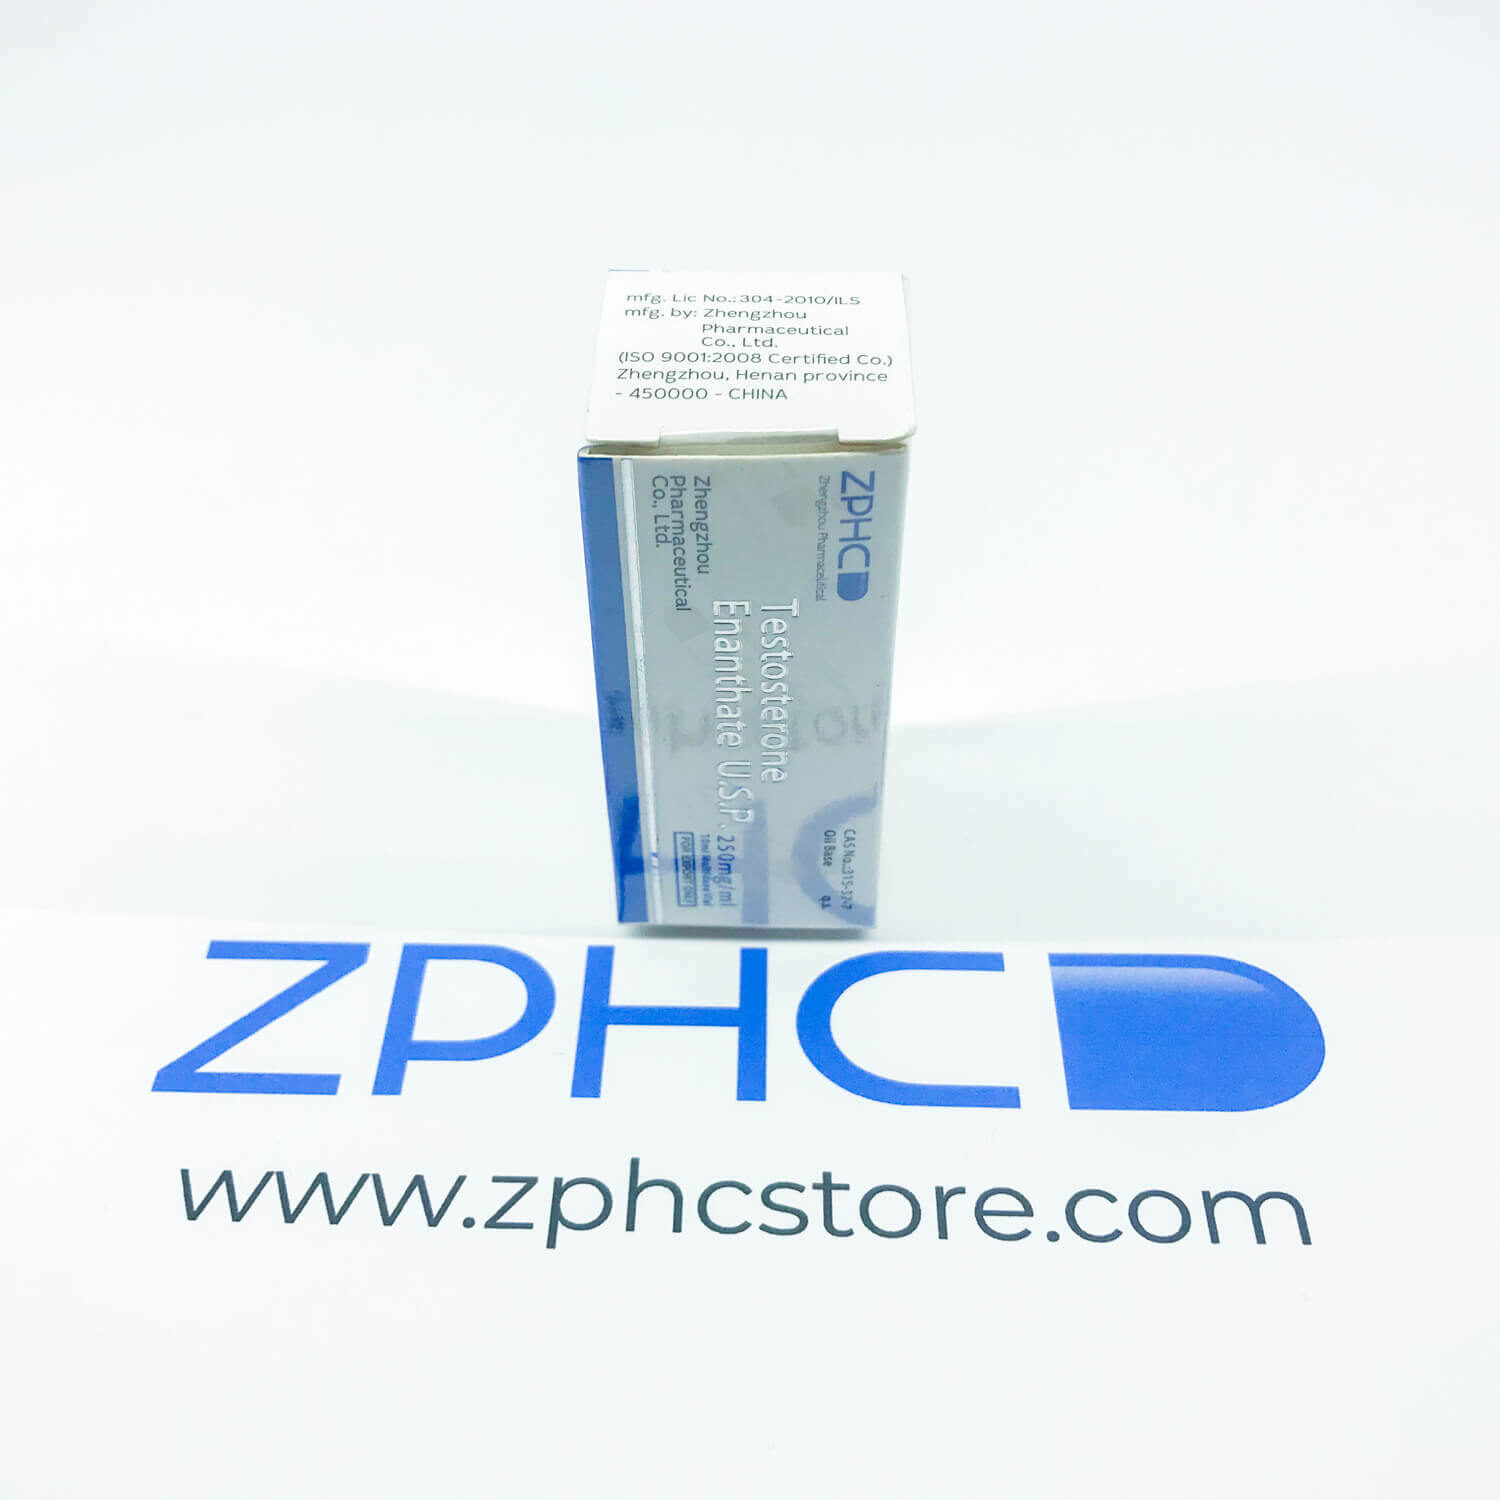 Testosterone Enanthate, Test E ZPHC zphcstore.com